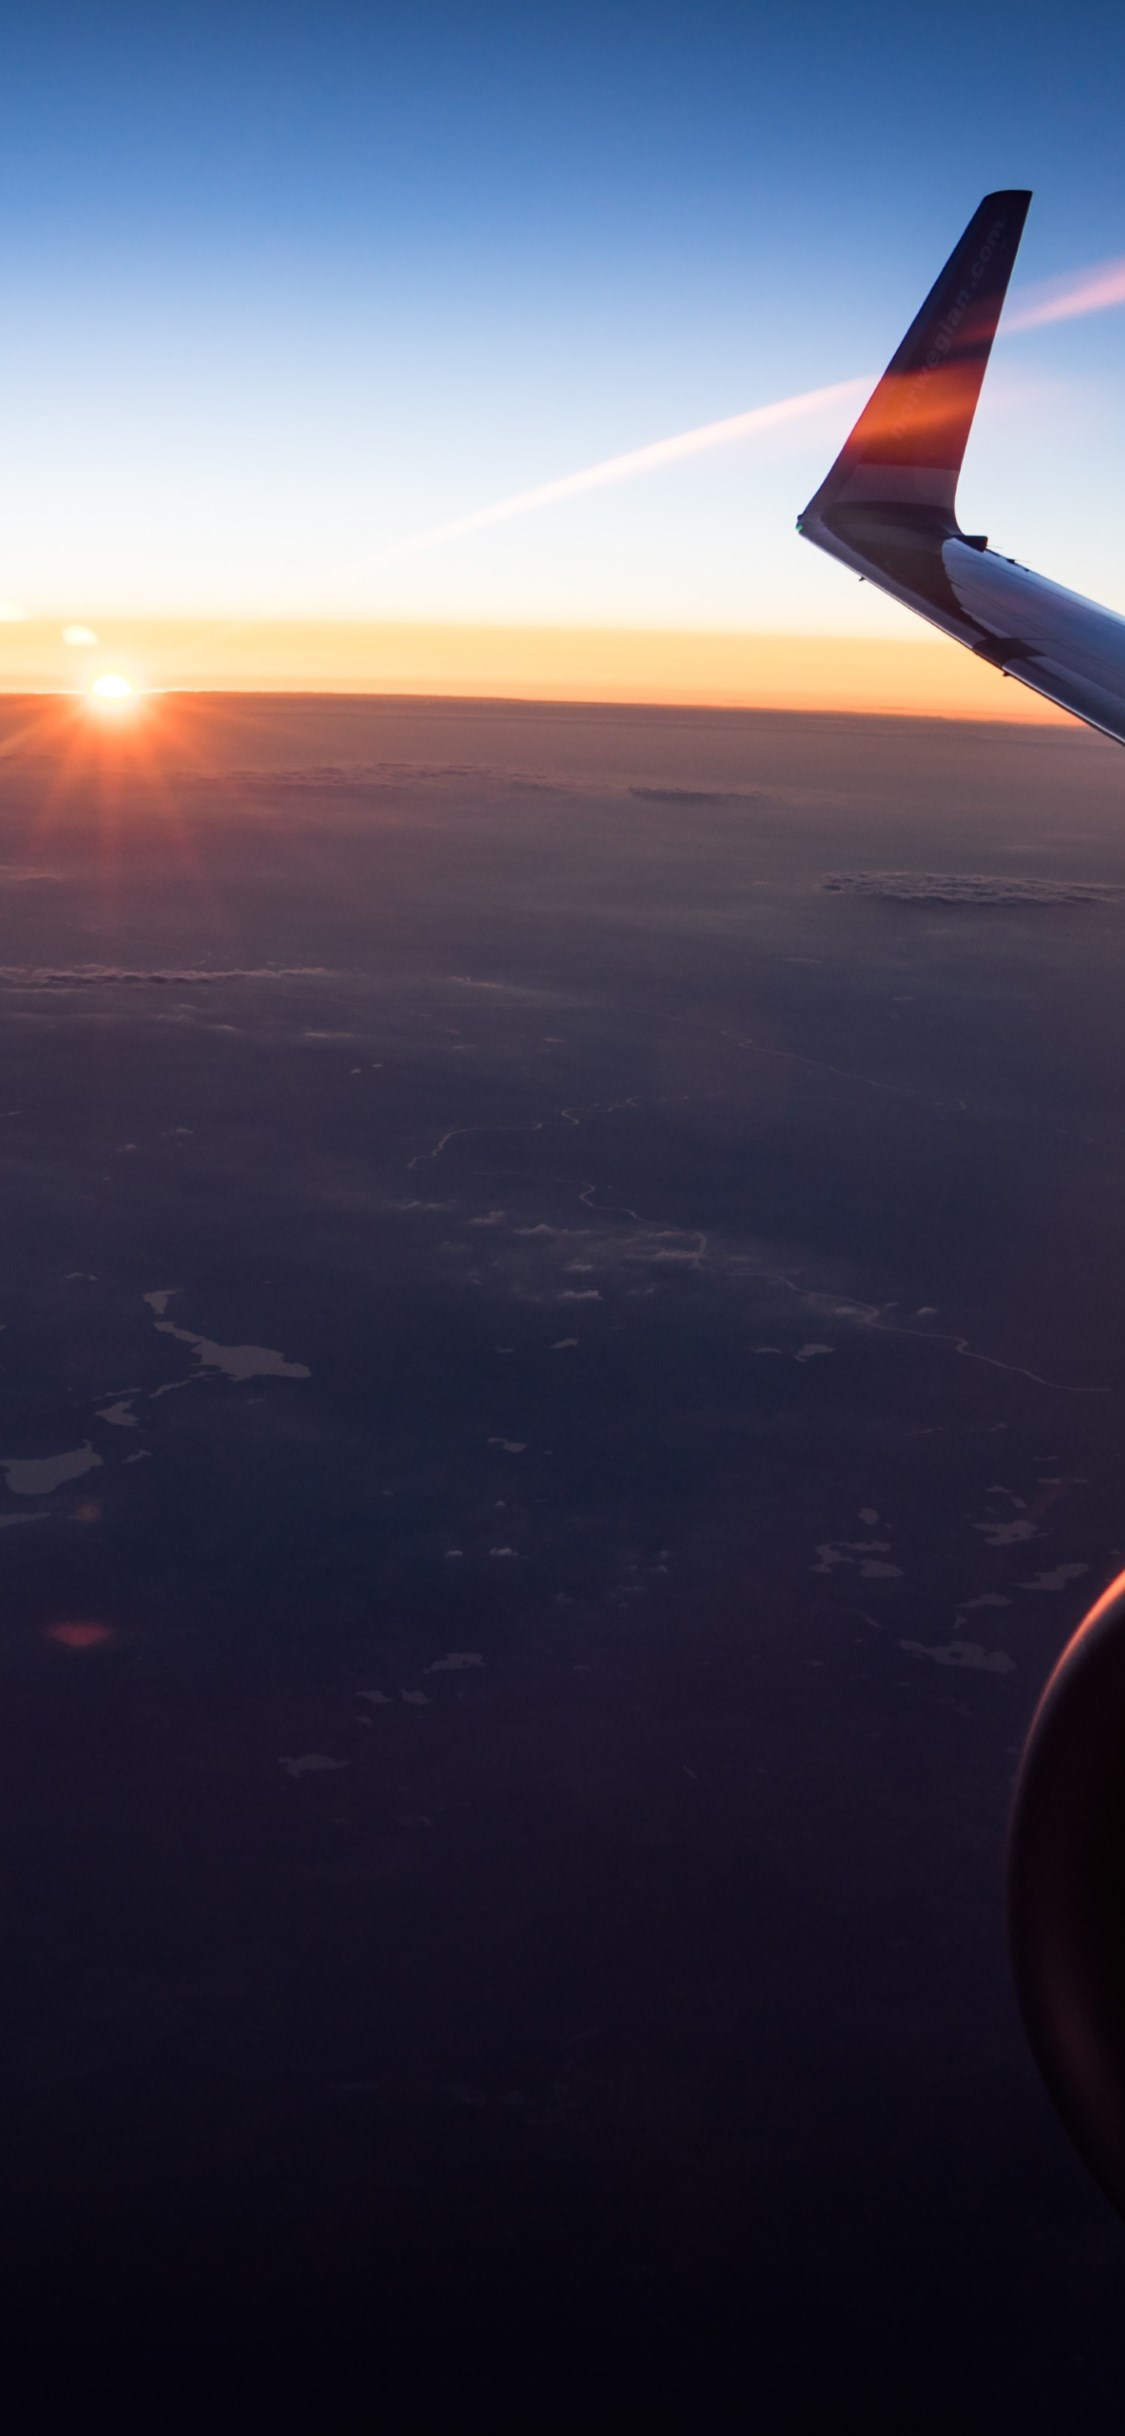 In the plane watching the sunset wallpaper 1125x2436